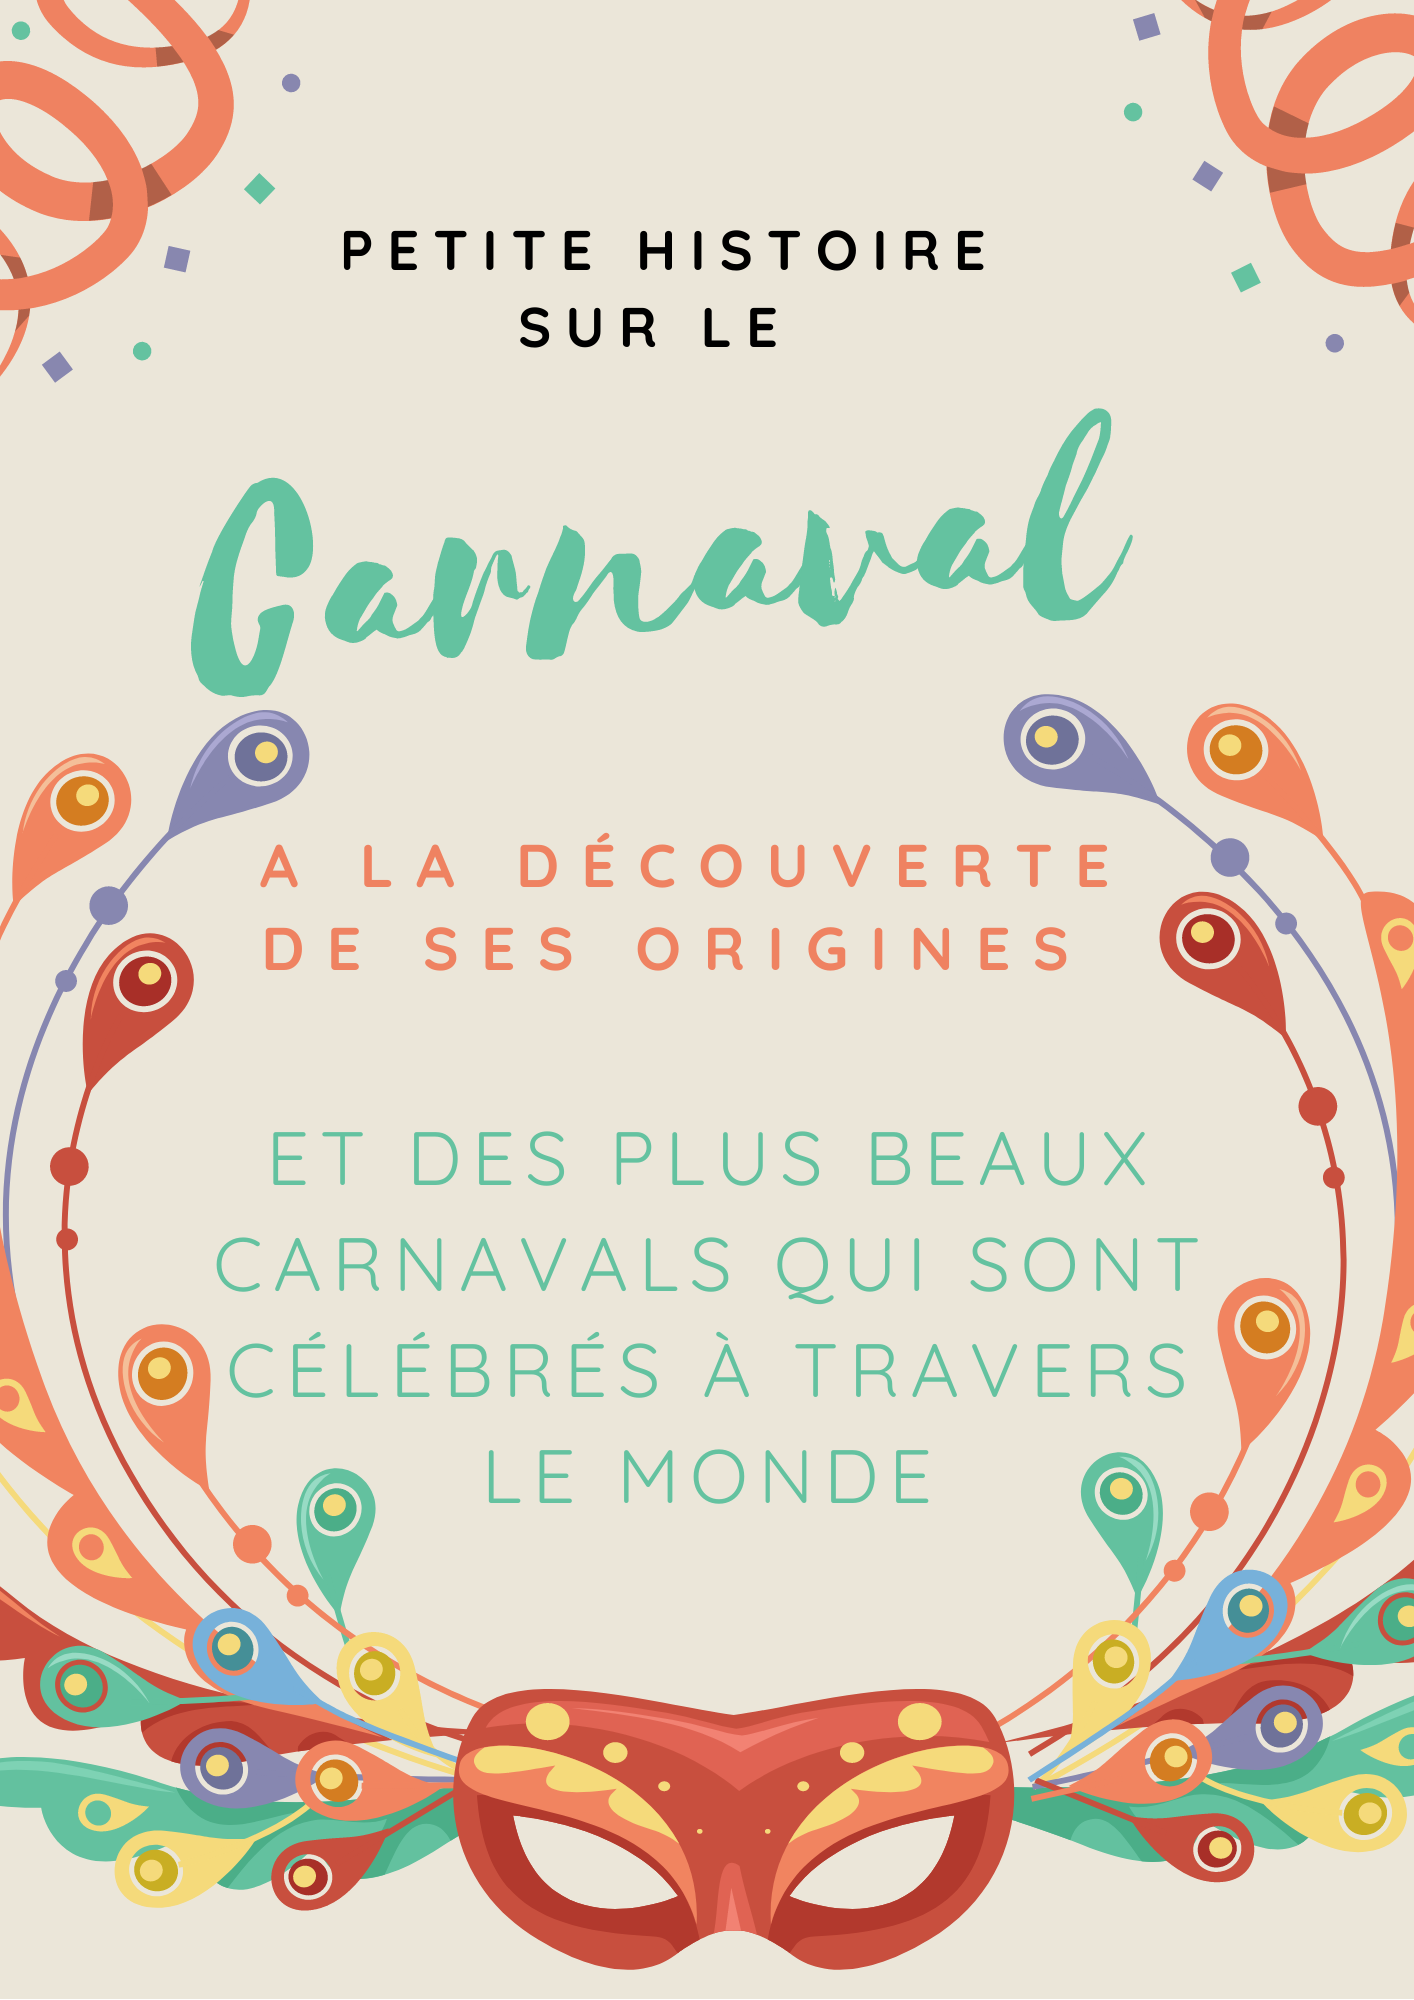 Expo carnaval affiches.png